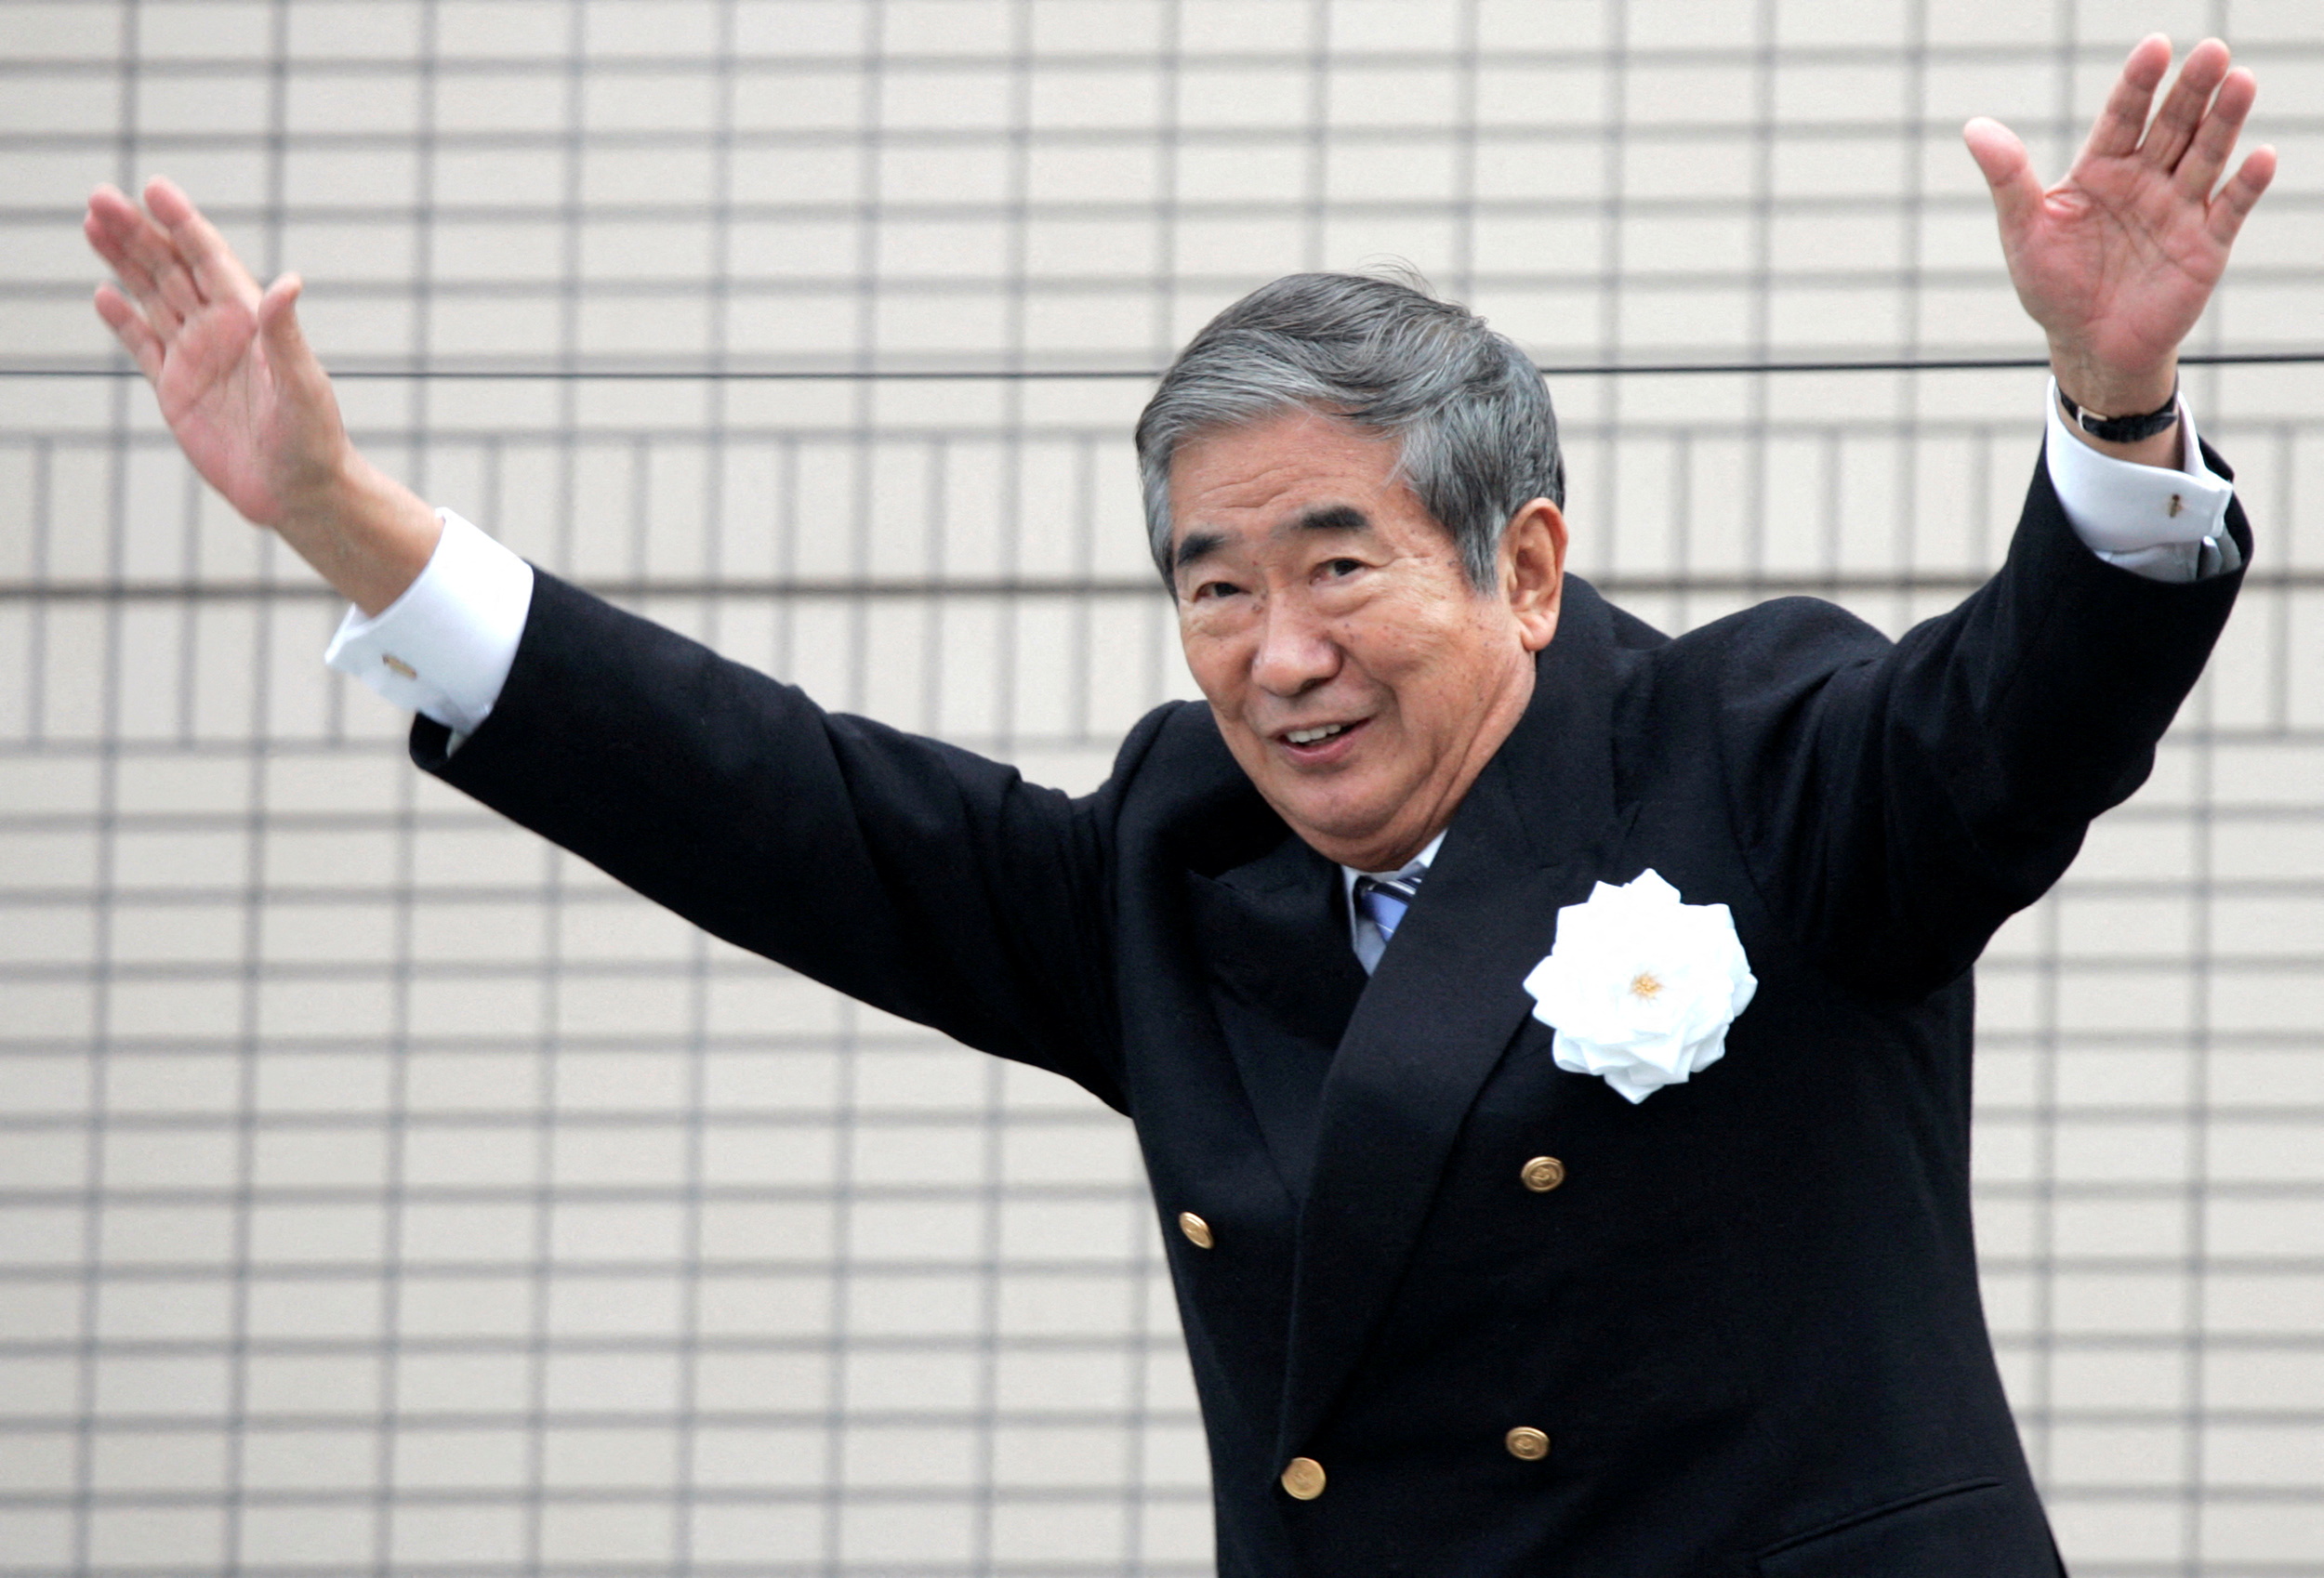 Tokyo Governor Ishihara waves to voters during his stumping tour for the Tokyo gubernatorial election in Tokyo